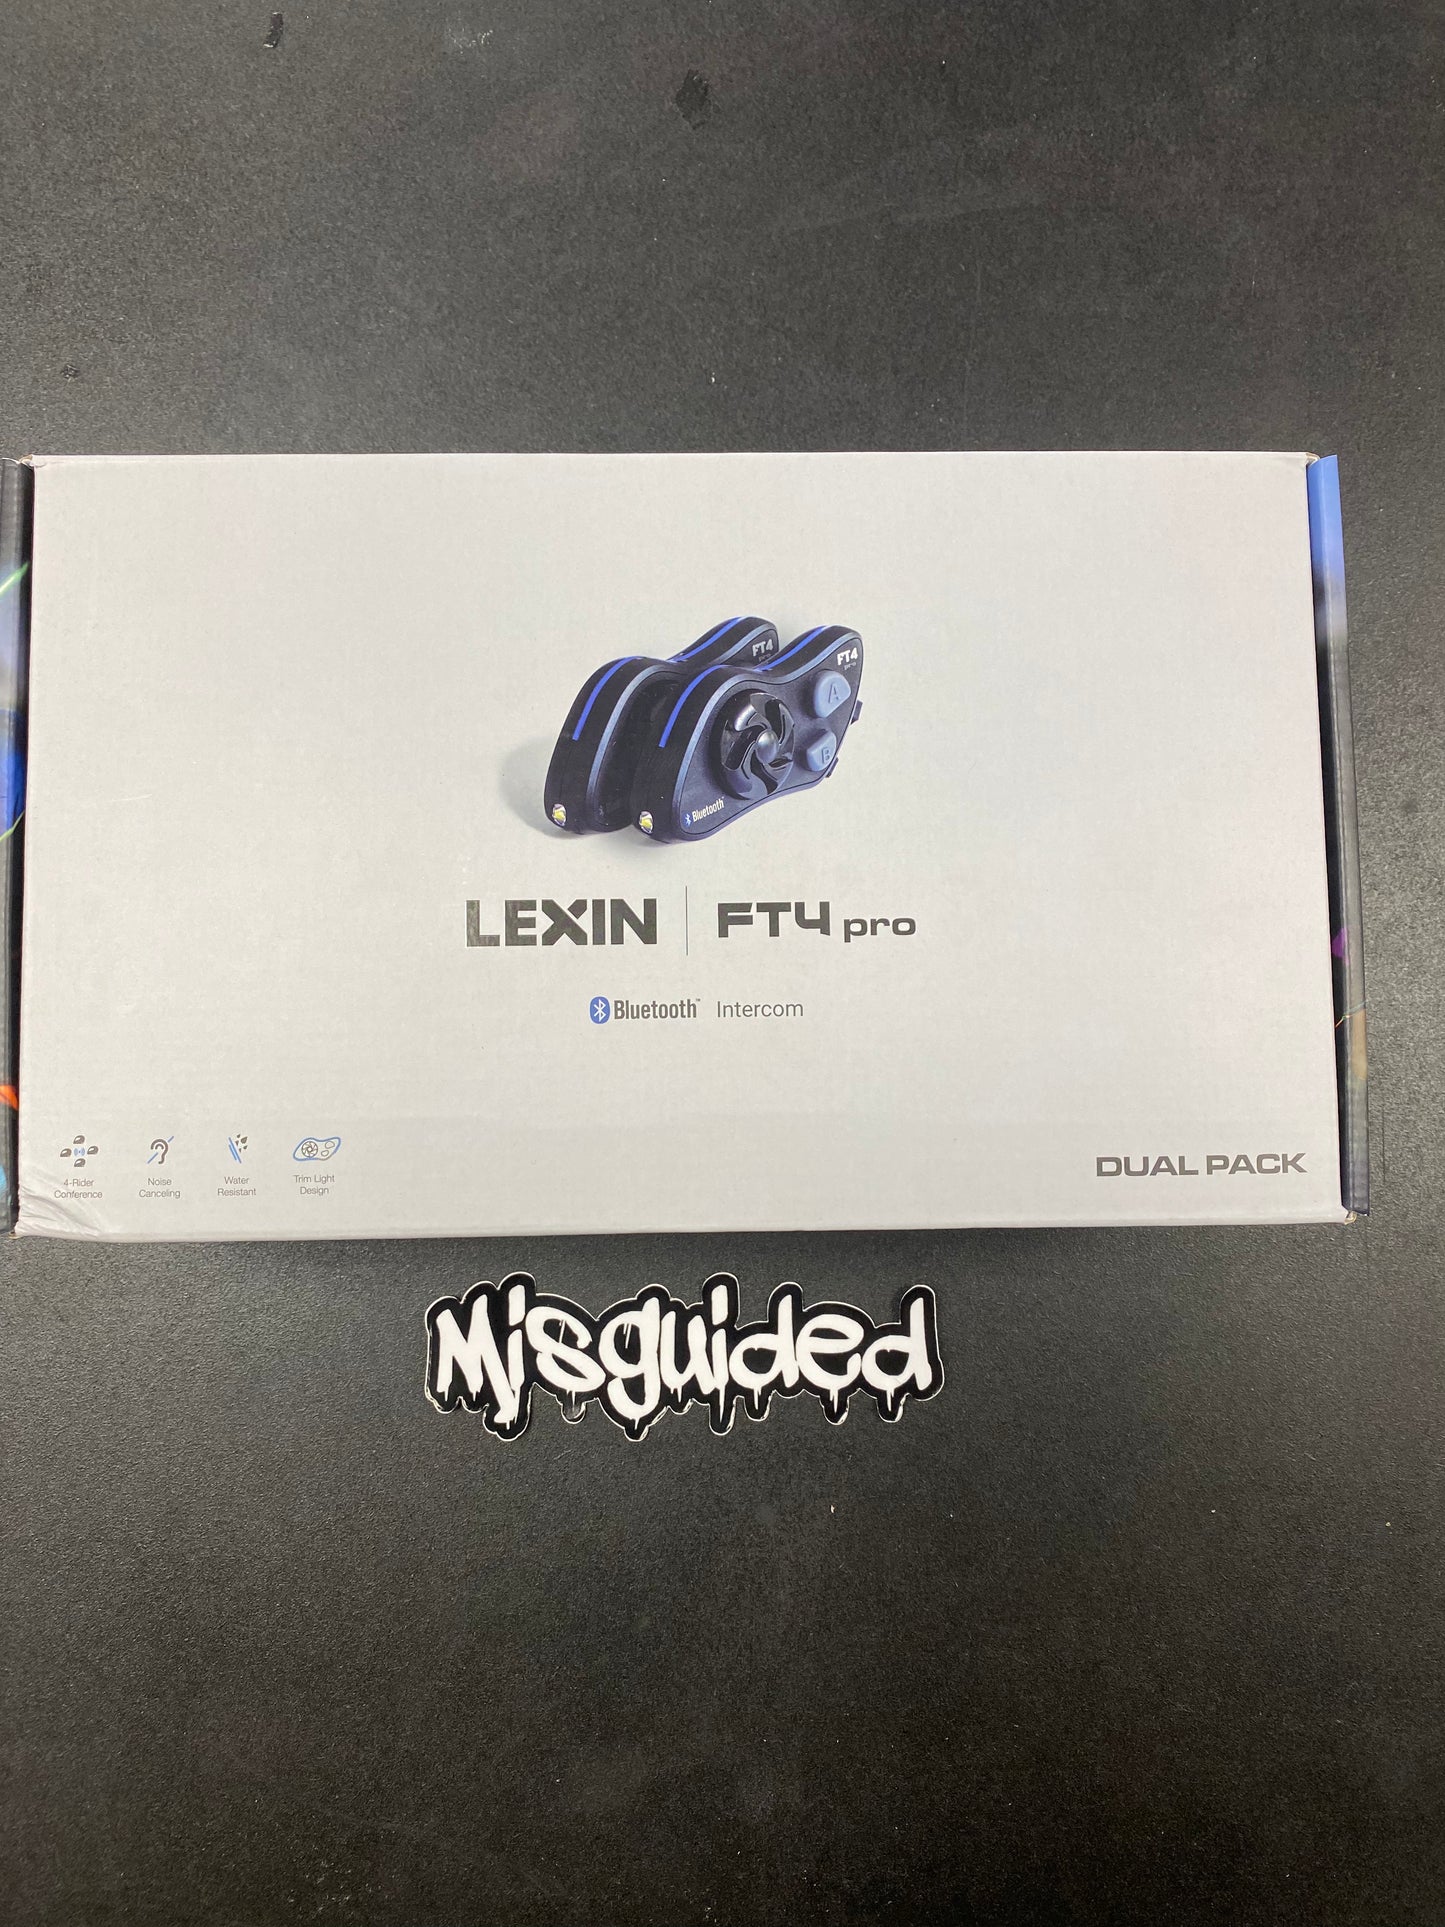 Lexin FT4 Pro Bluetooth Headset Dual Pack!